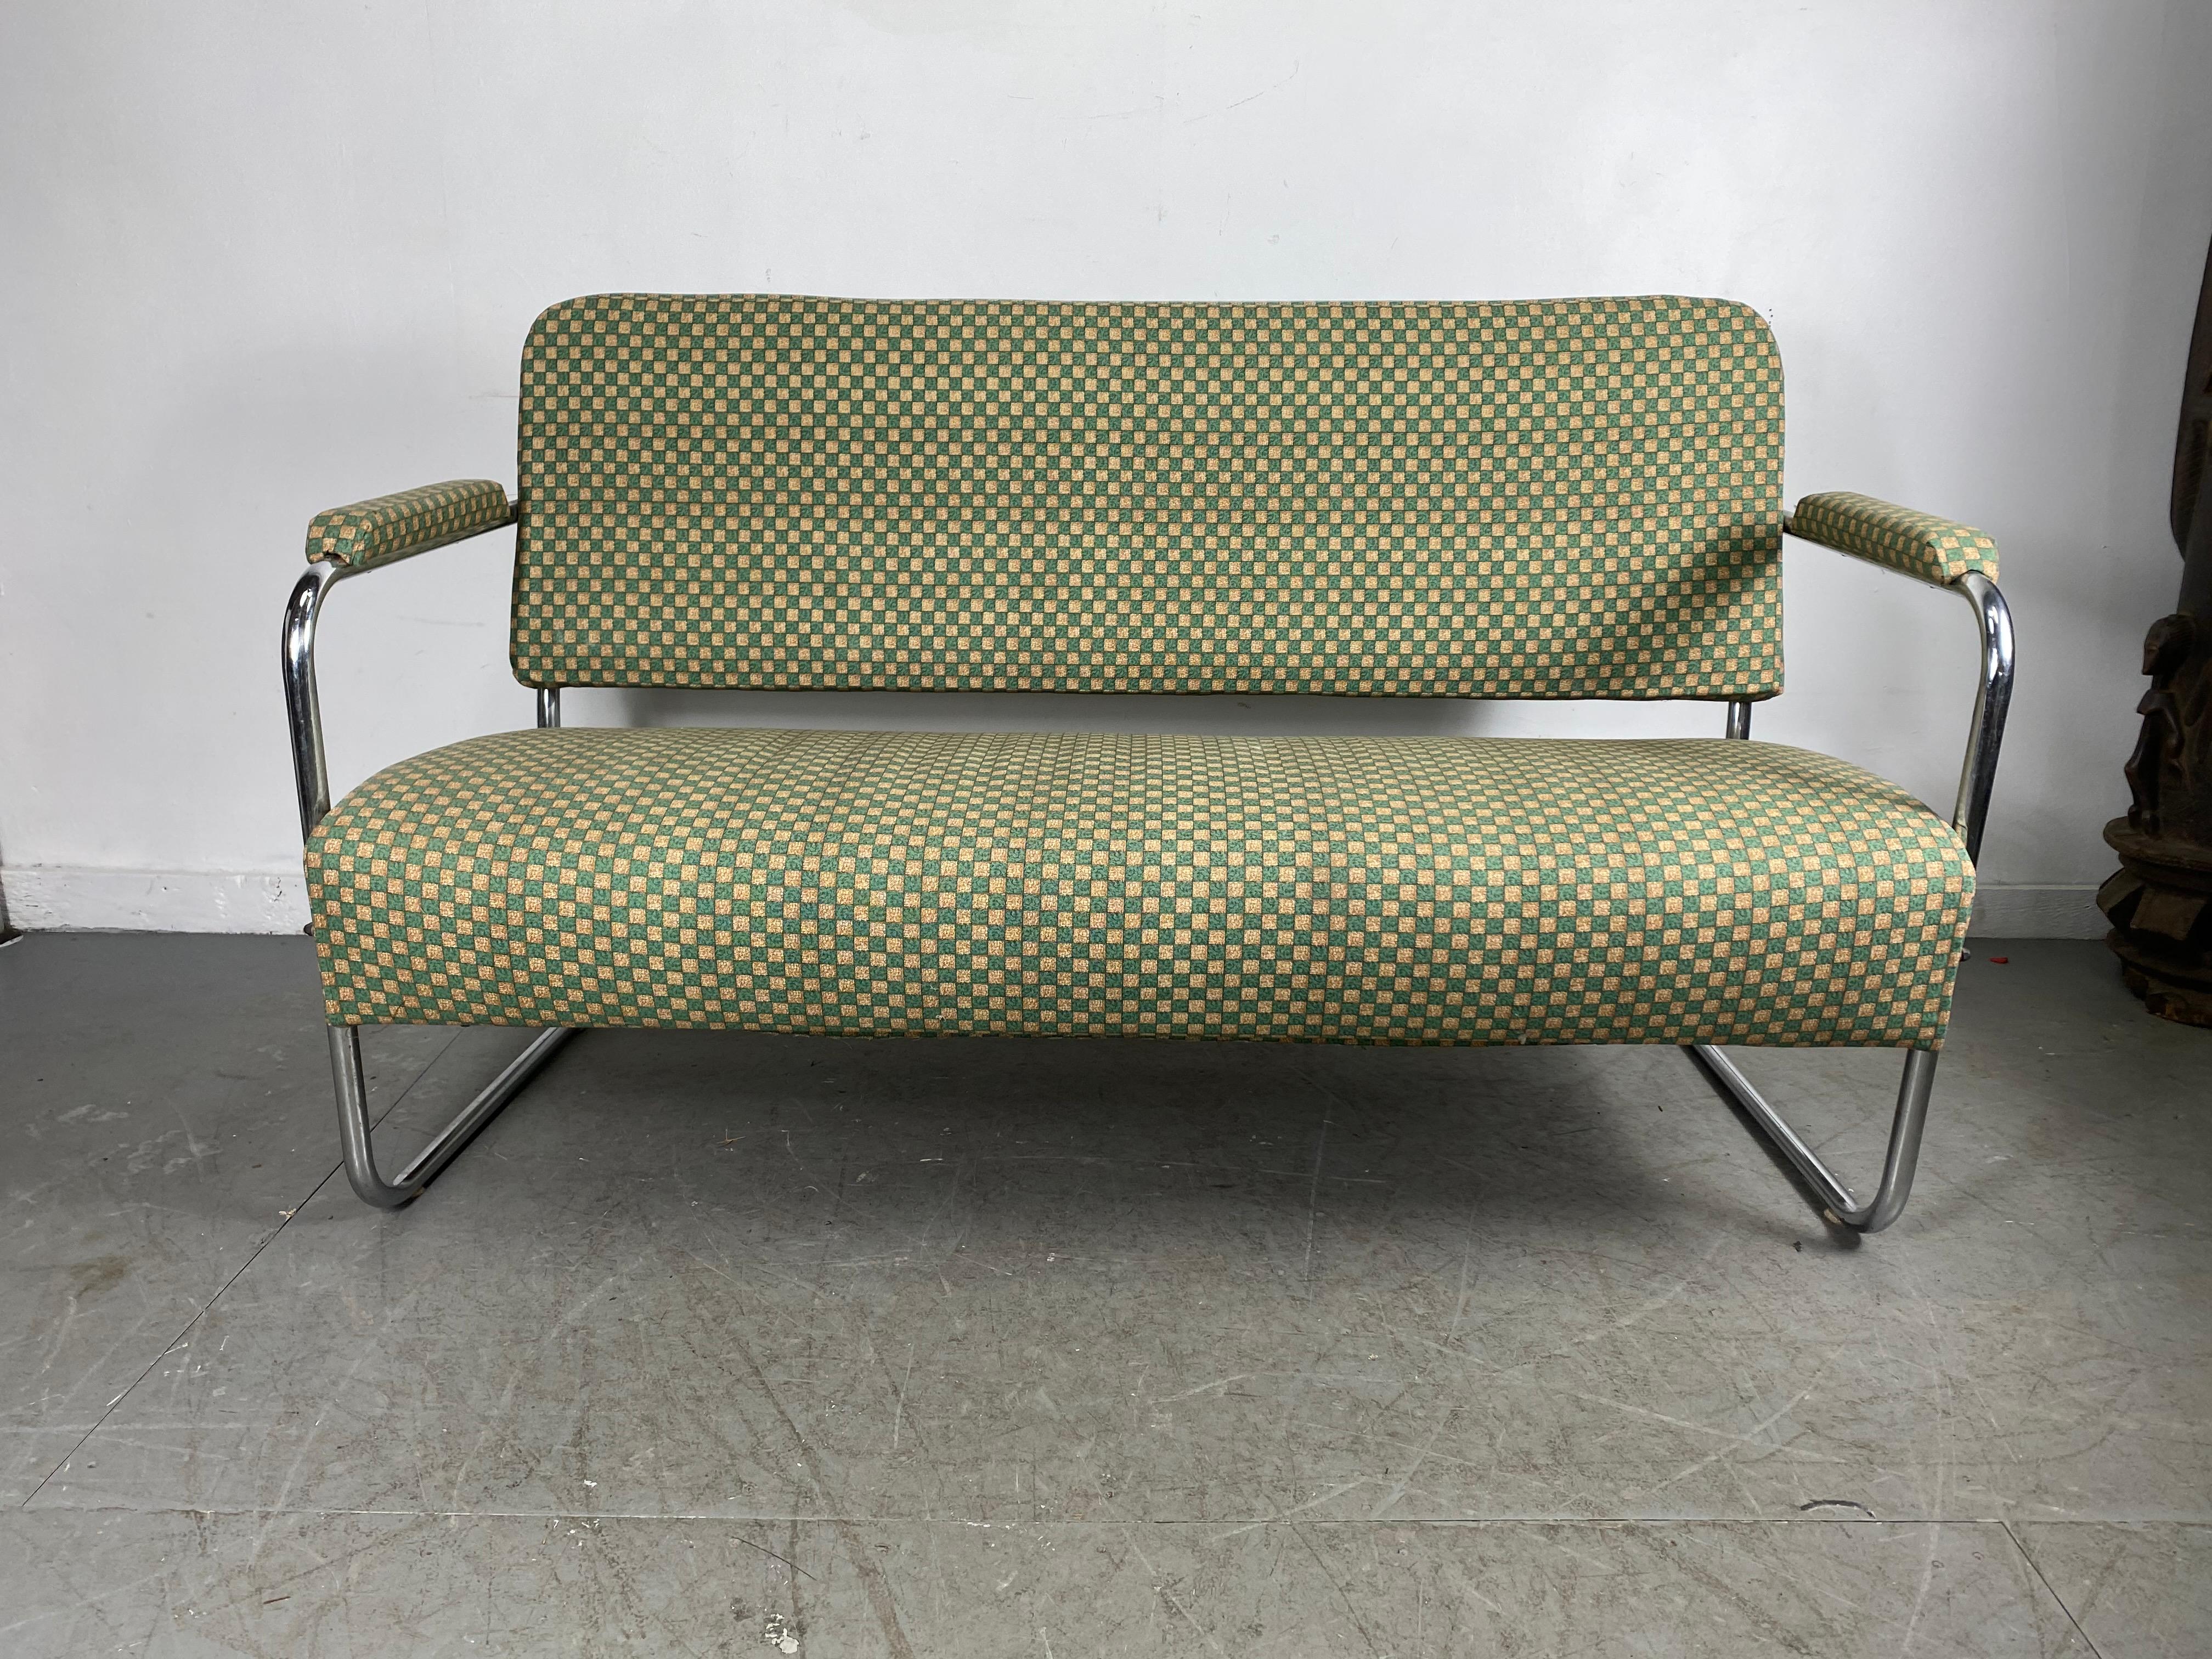 Mid-20th Century Art Deco / Machine Age Chrome Settee Designed by Gilbert Rohde for Troy Sunshade